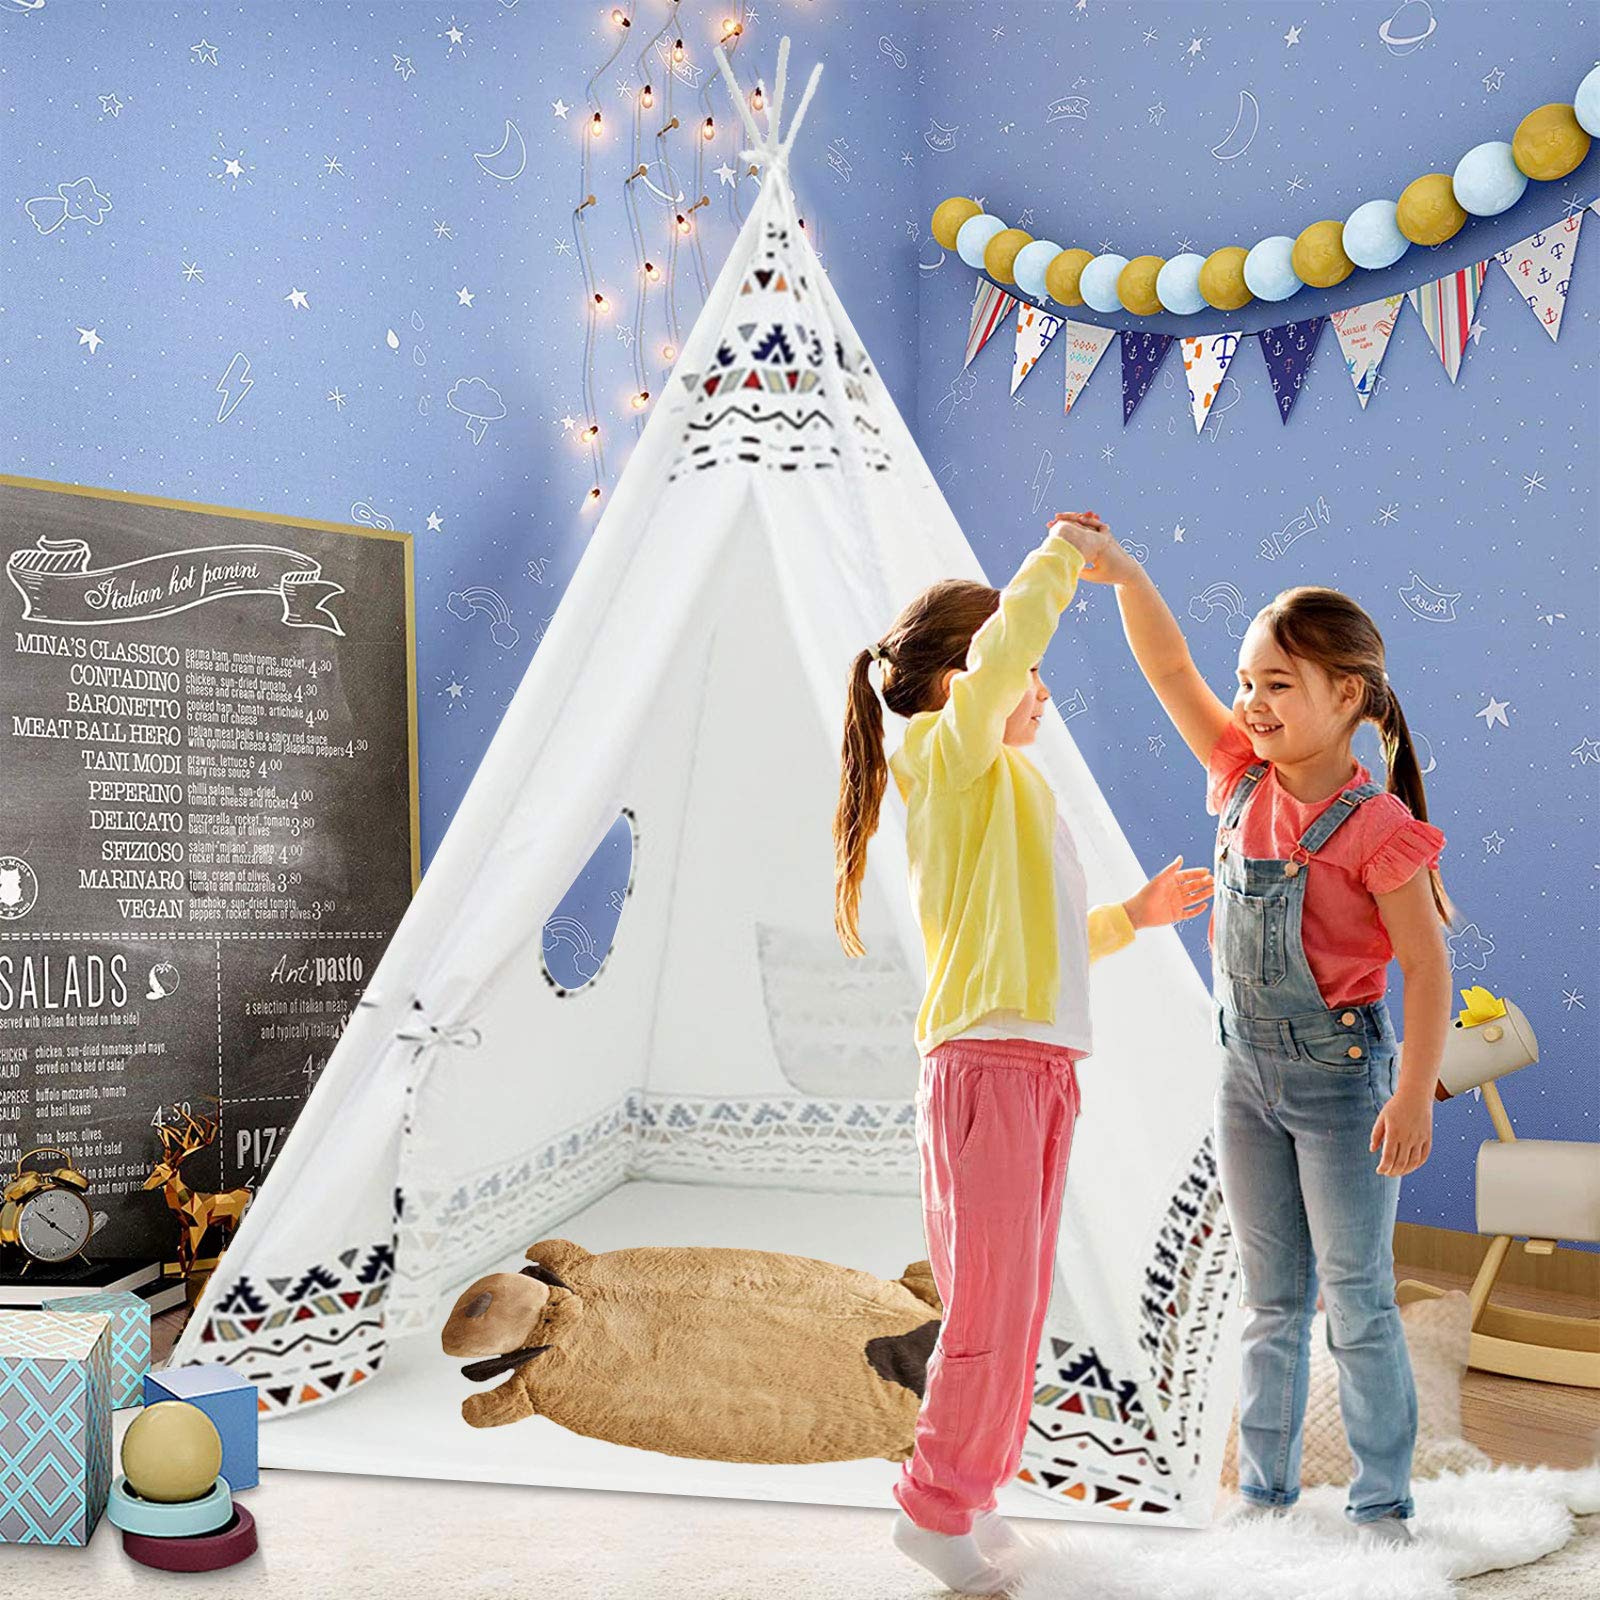 Factory directly Home Slide For Kids - Arkmiido Teepee Tent for Kids Raw White Canvas Teepee with Windows Carry Case Foldable Children Play Tents Playhouse Toys for Baby Toddler Girls/Boys Indoor ...